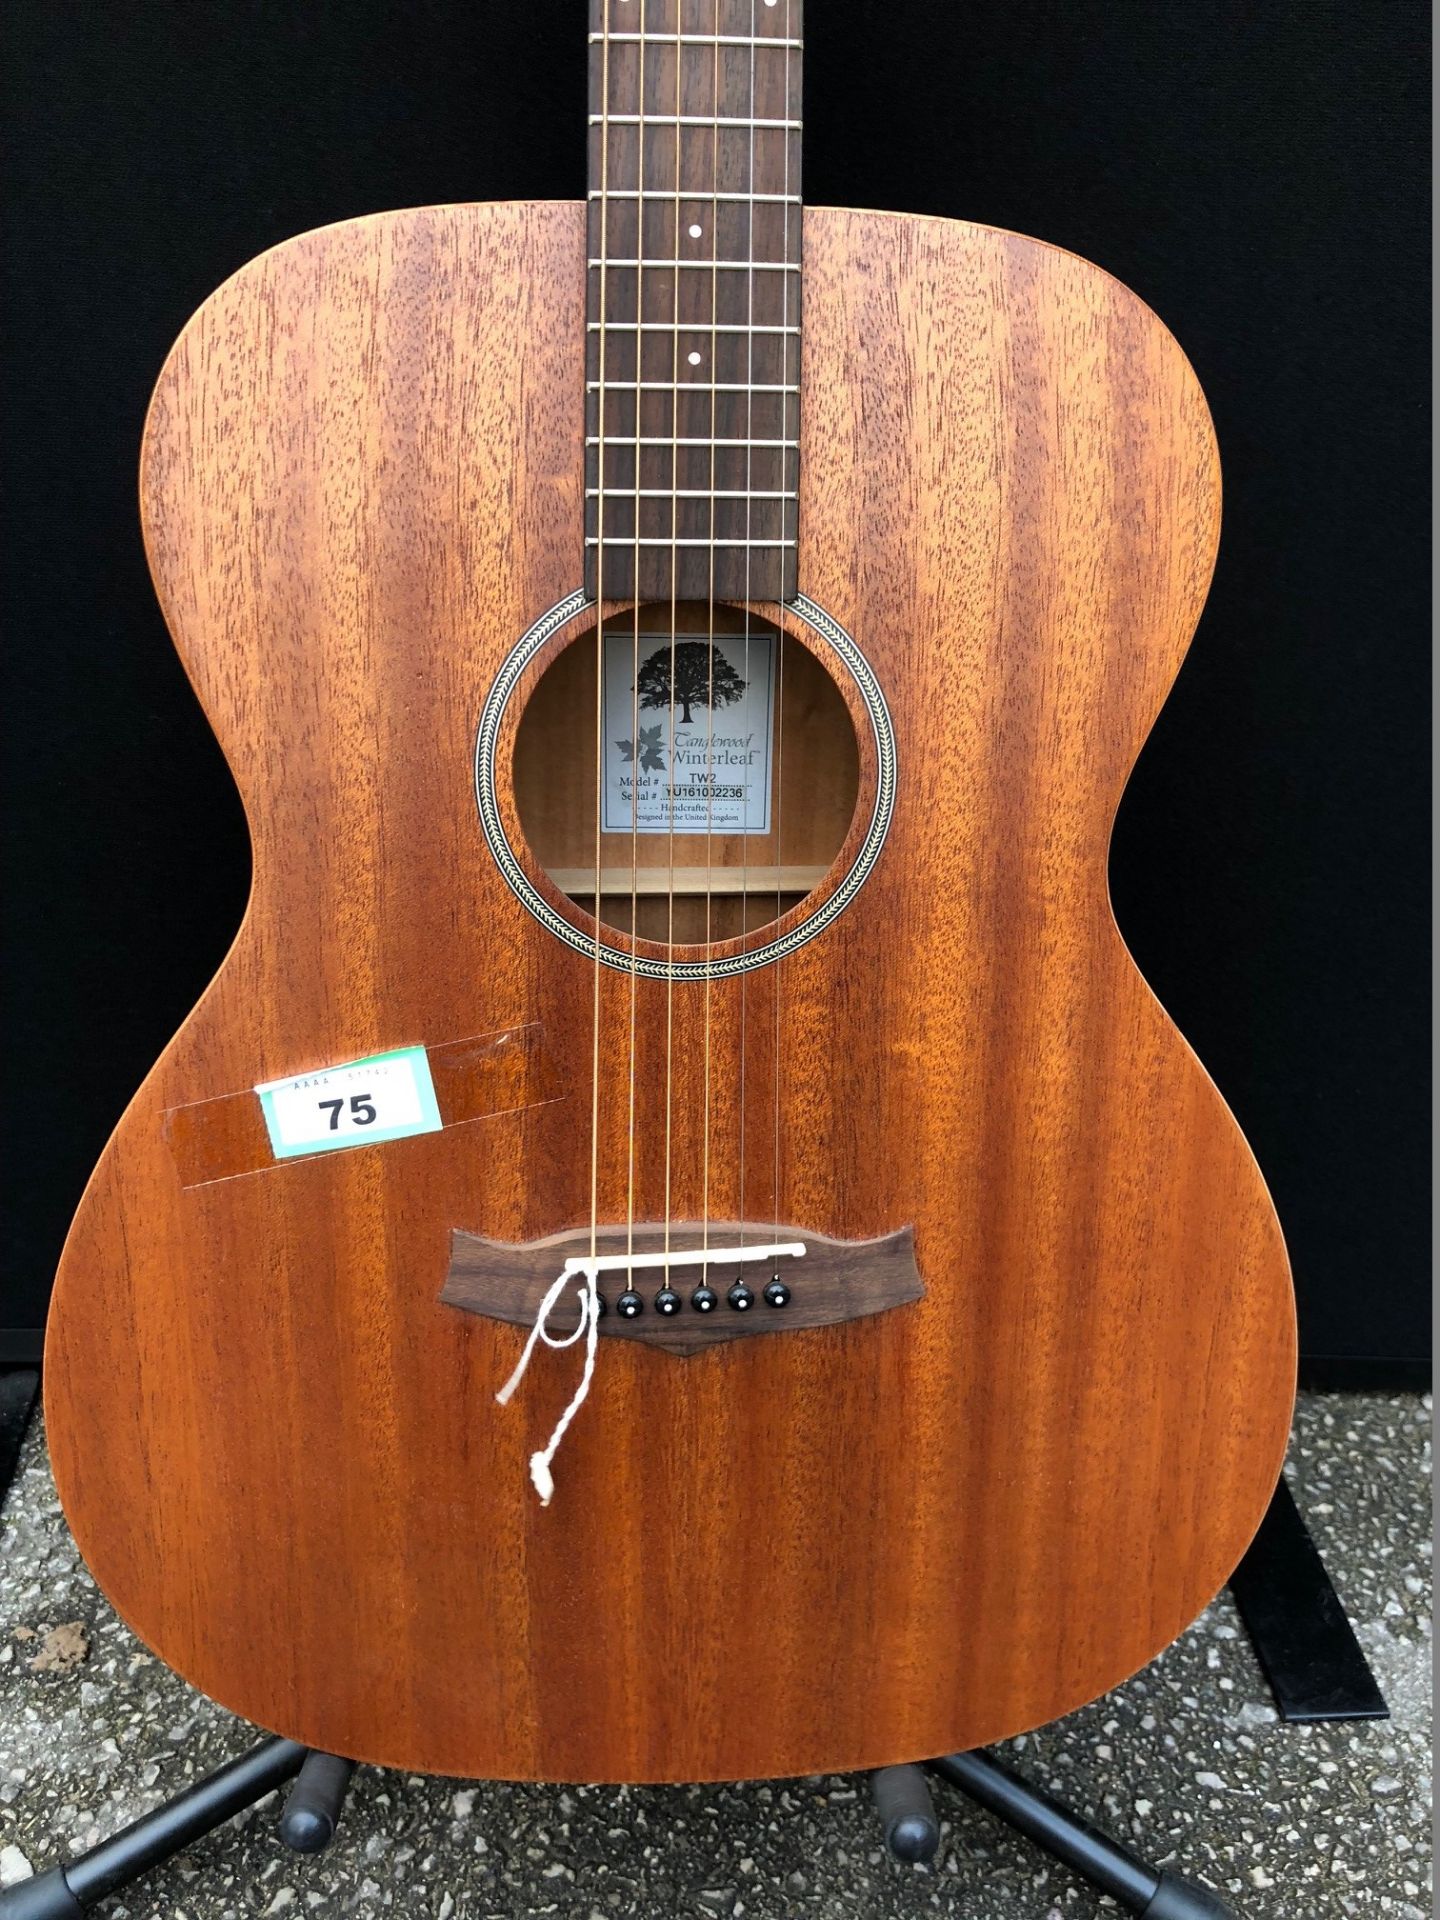 Tanglewood TW2 Acoustic Guitar (Brand New Ex Display - RRP £299.00) - Image 2 of 6